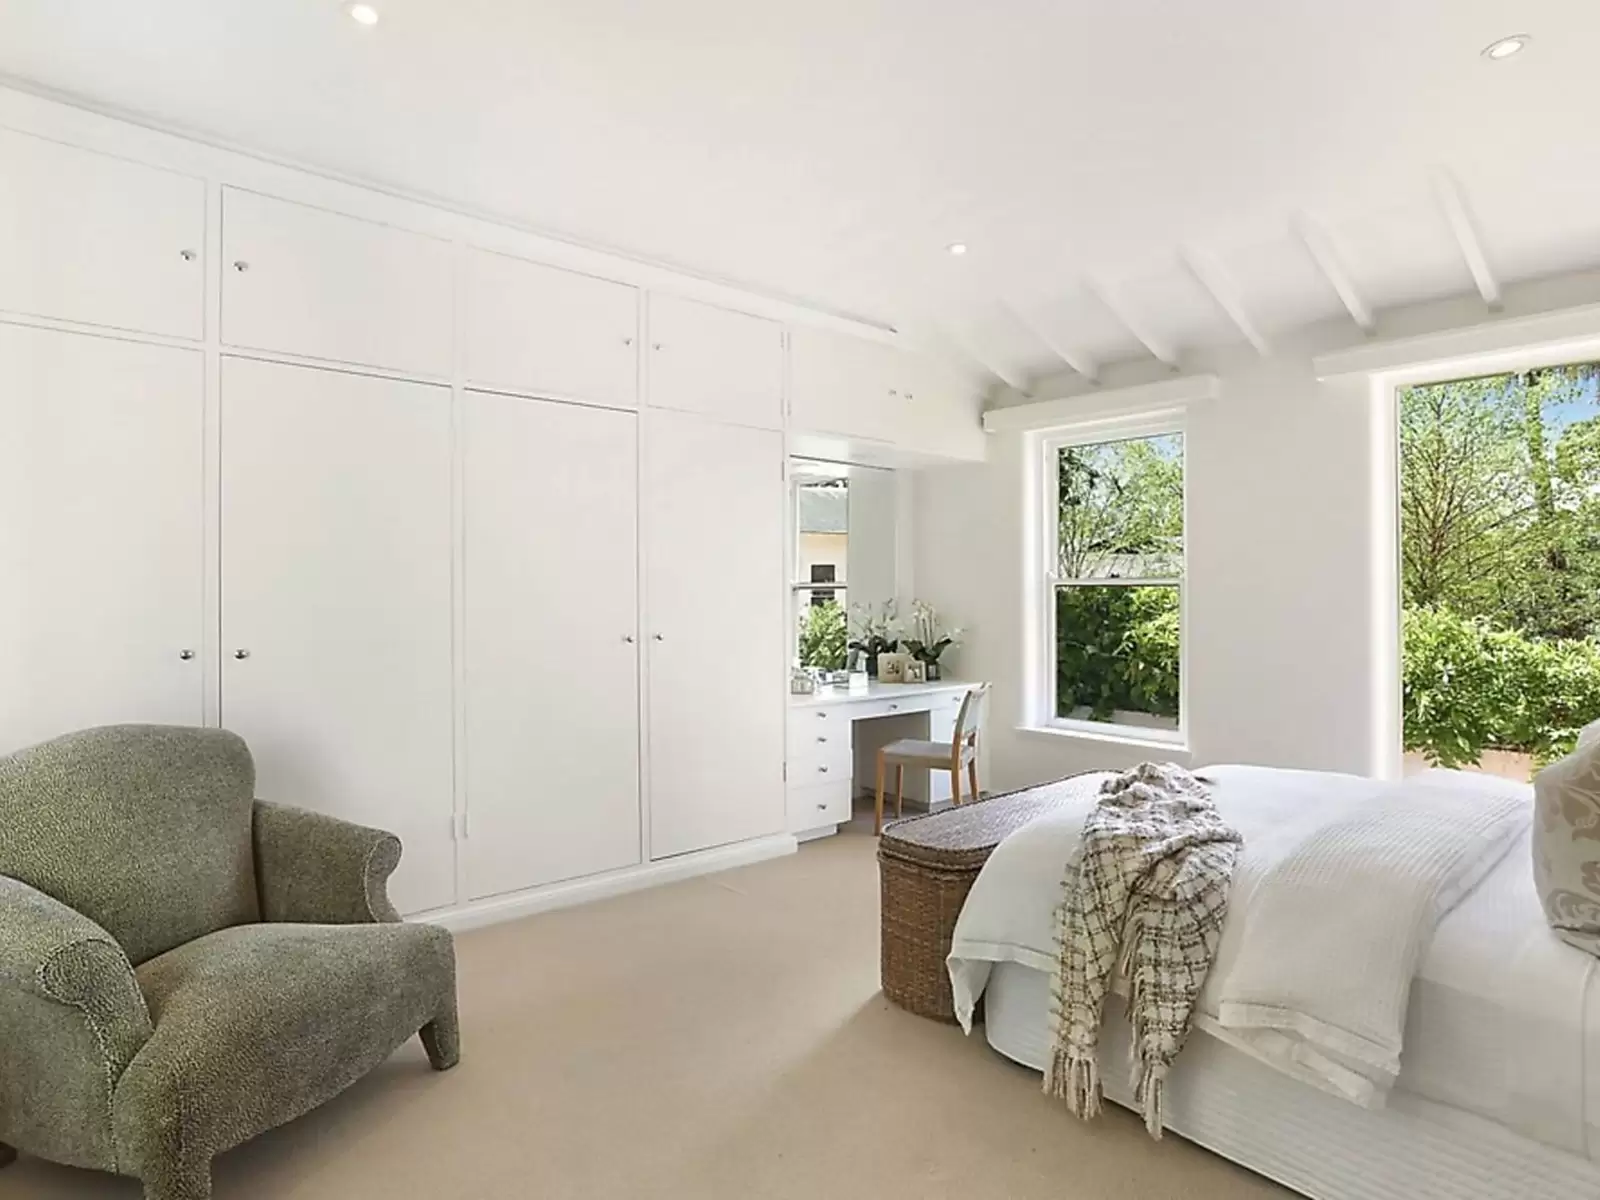 Photo #5: 15 Rosemont Avenue, Woollahra - Sold by Sydney Sotheby's International Realty